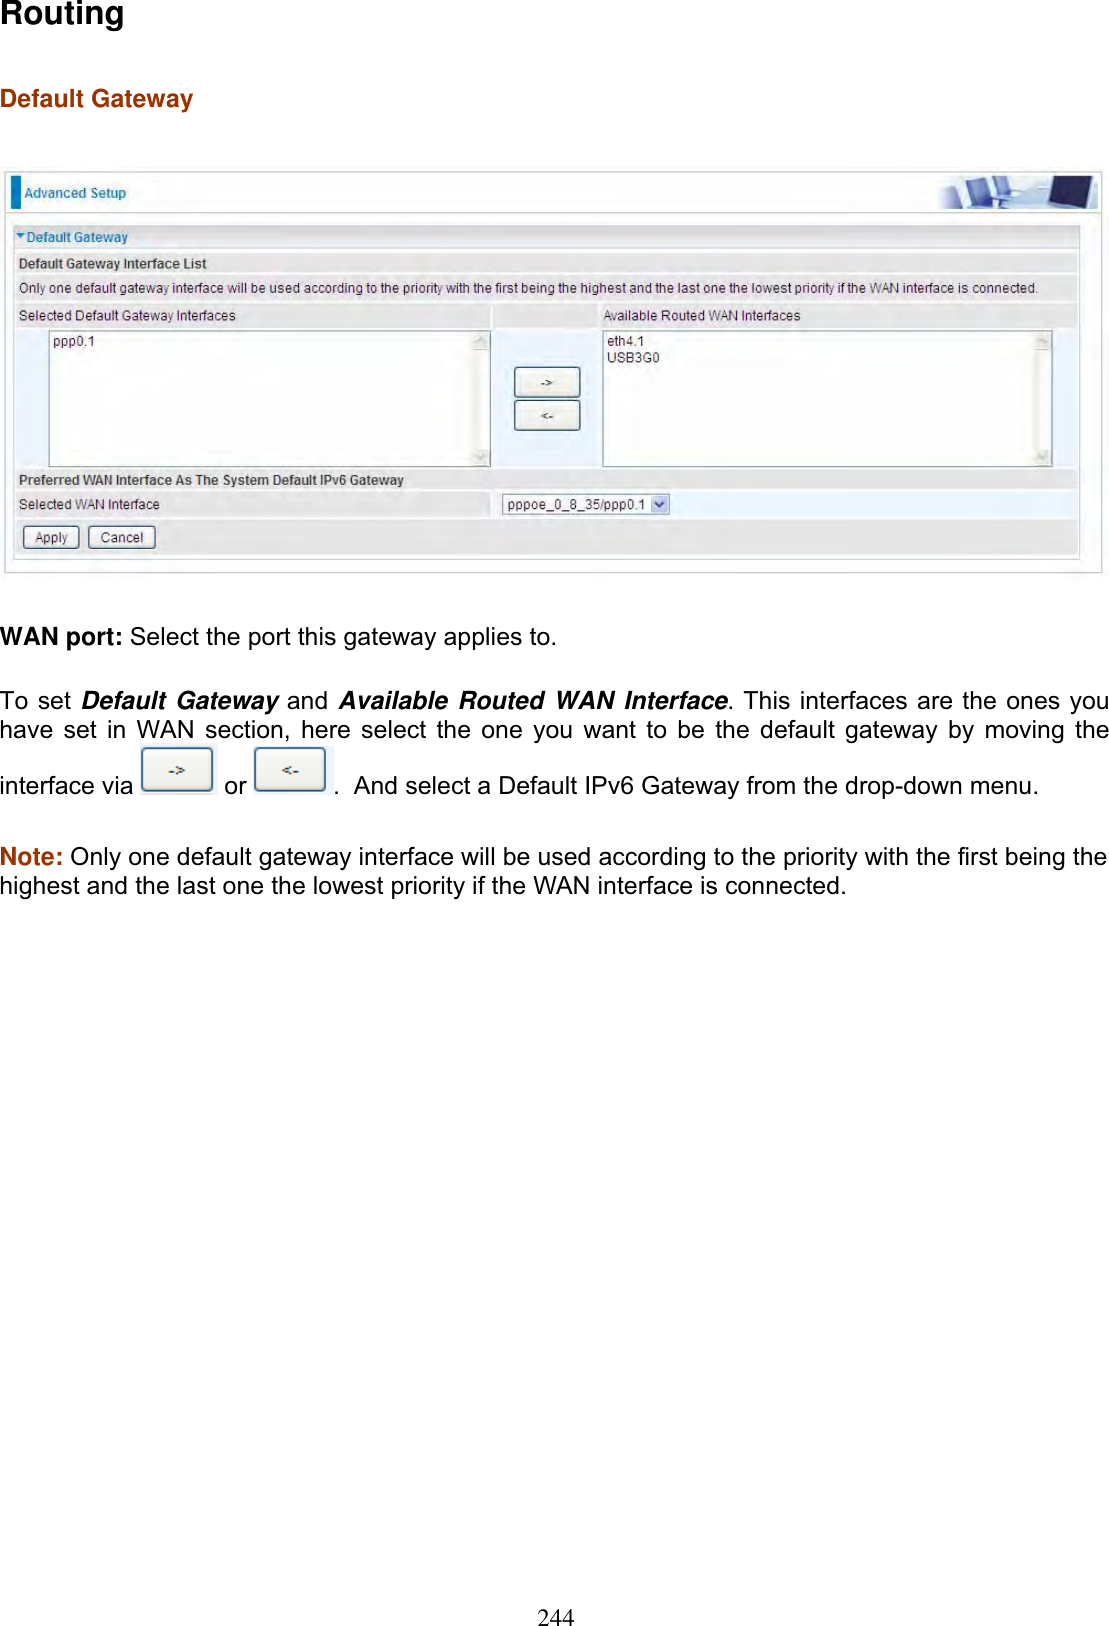 244RoutingDefault Gateway WAN port: Select the port this gateway applies to. To set Default Gateway and Available Routed WAN Interface. This interfaces are the ones you have set in WAN section, here select the one you want to be the default gateway by moving the interface via   or  .  And select a Default IPv6 Gateway from the drop-down menu.Note: Only one default gateway interface will be used according to the priority with the first being the highest and the last one the lowest priority if the WAN interface is connected.